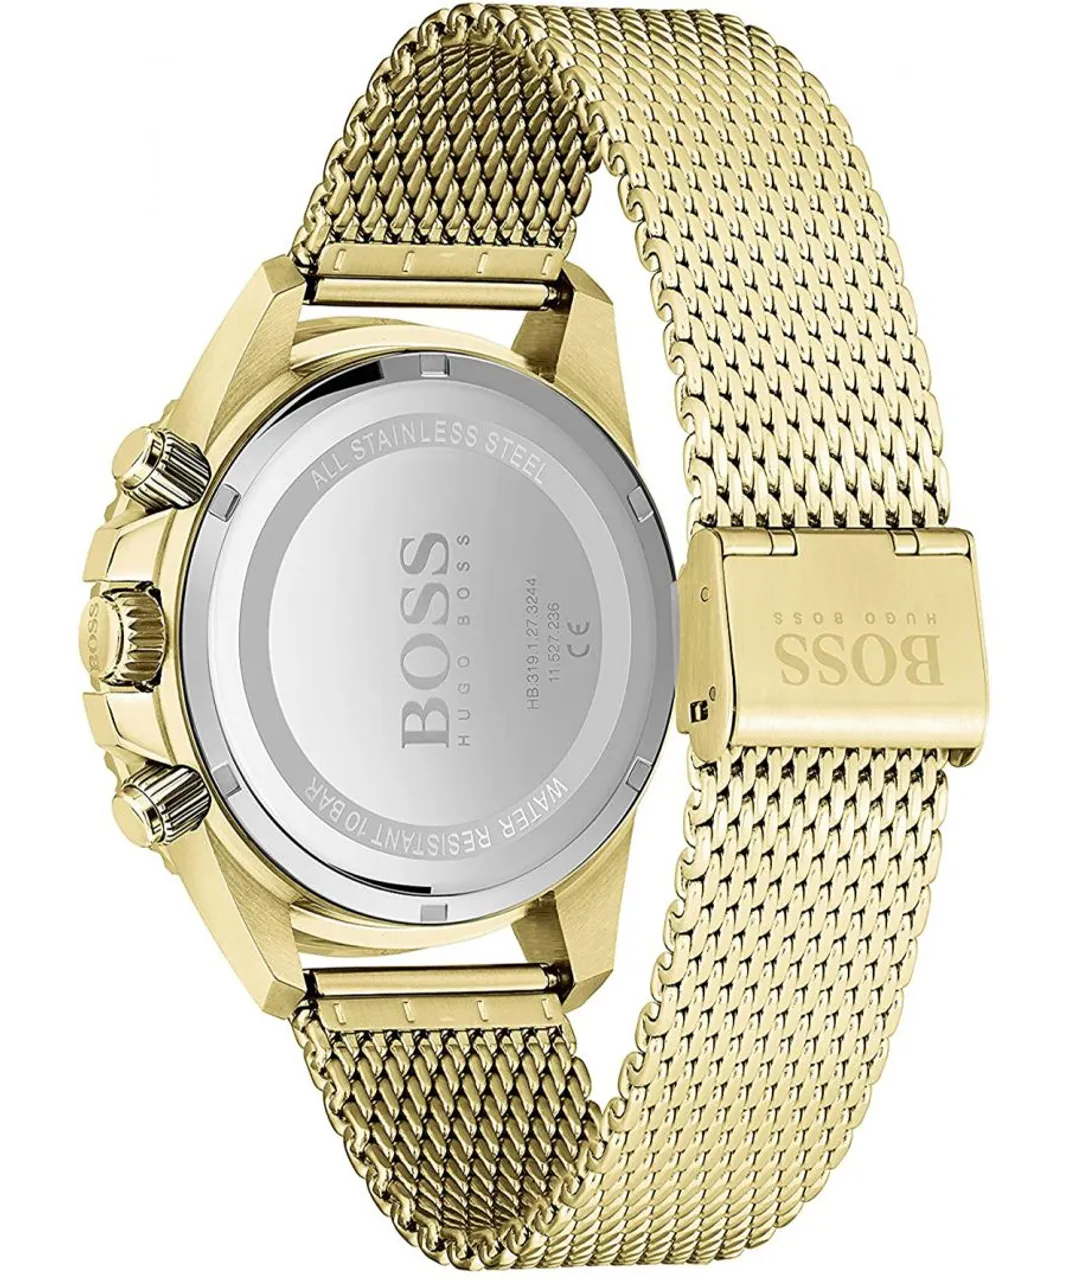 Hugo Boss Mens Men Watch 1513906 - Gold Stainless Steel - One Size